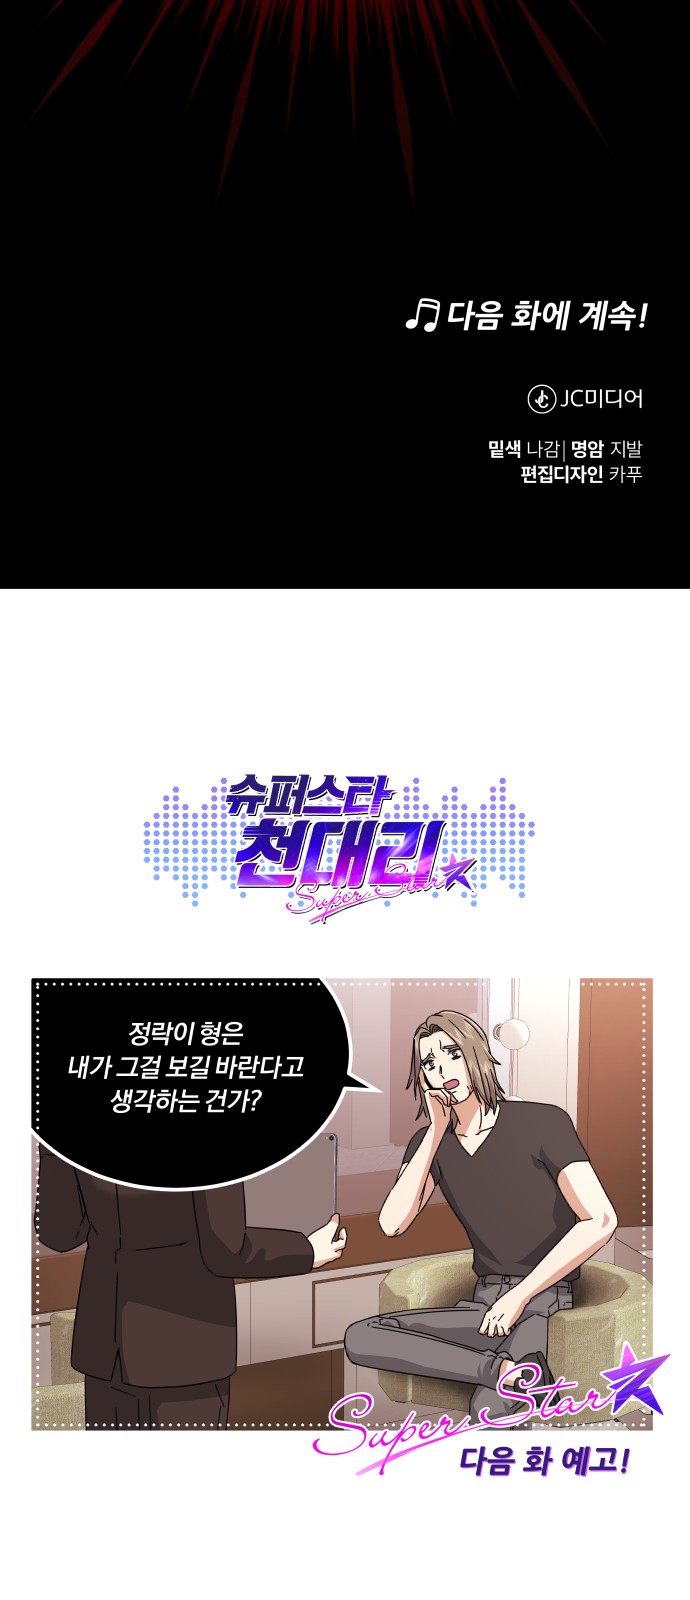 Superstar Cheon Dae-ri - Chapter 20 - Page 86